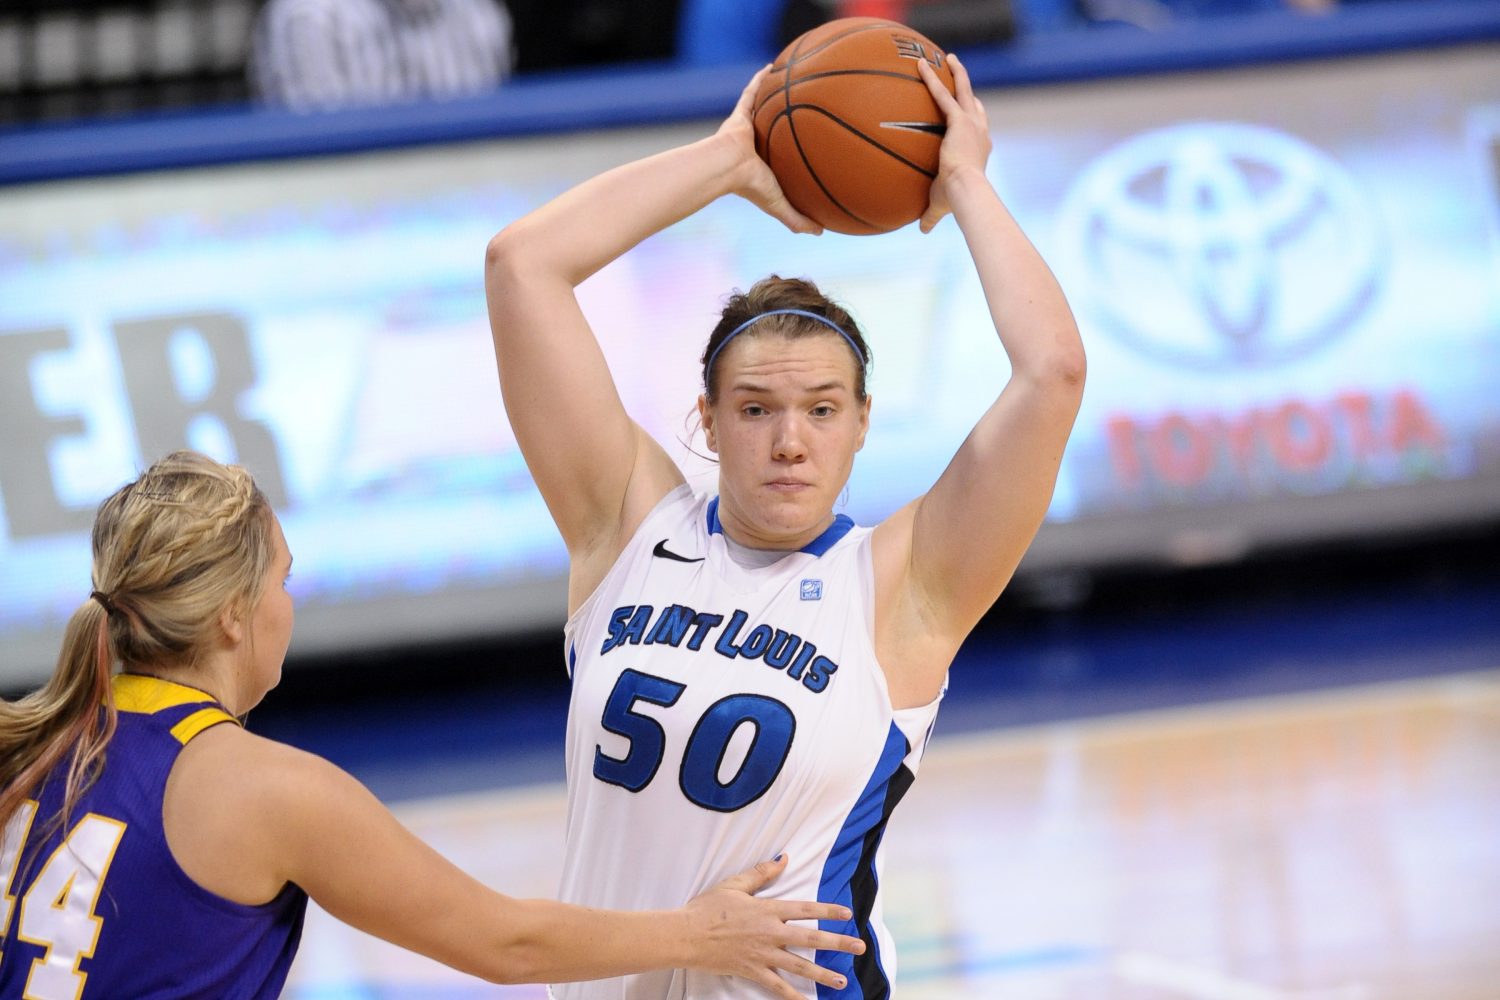 Mallory+Eggert+%2850%29+has+scored+in+double+digits+the+past+two+games.+She+scored+12+points+against+Nebraska-Omaha+and+11+points+against+Western+Illinois.+Courtesy+of+Billikens+Media+Relations+